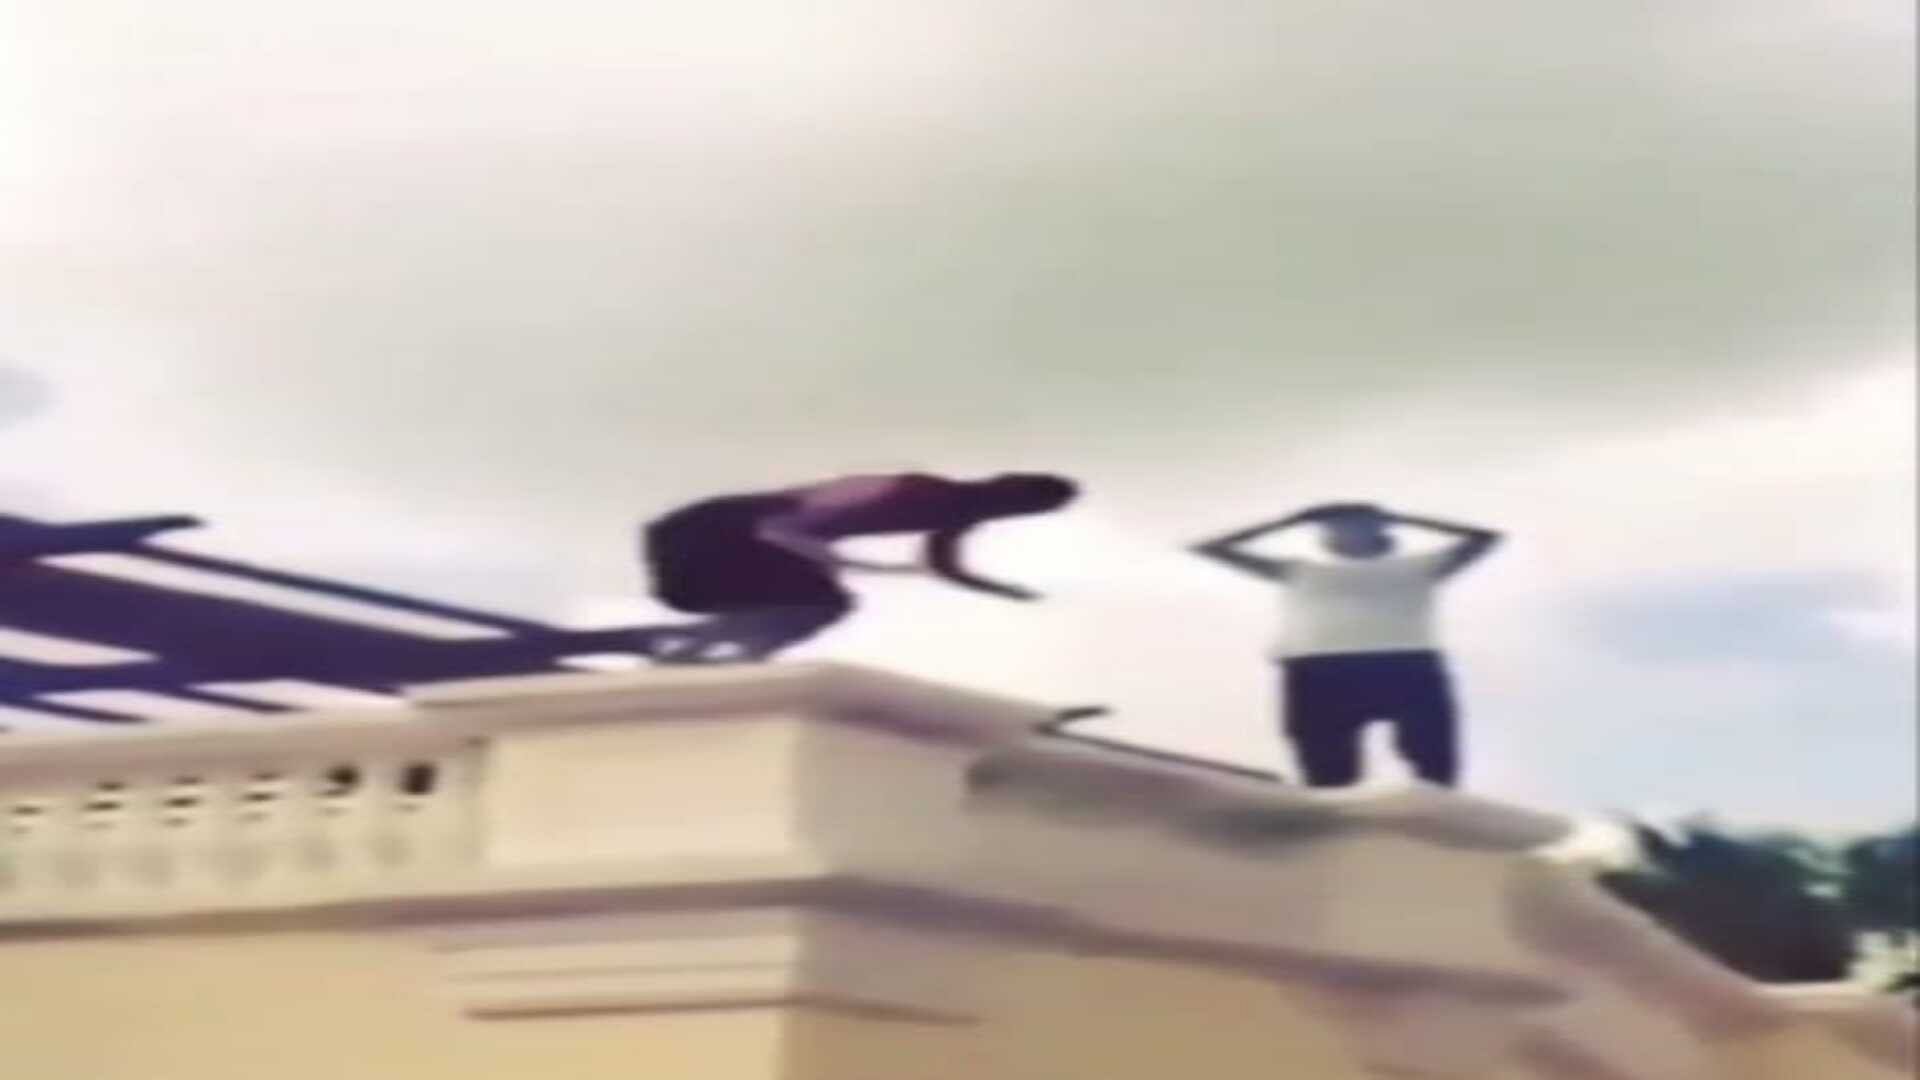 During stunt man standing on the railing then fell down video goes viral on social media